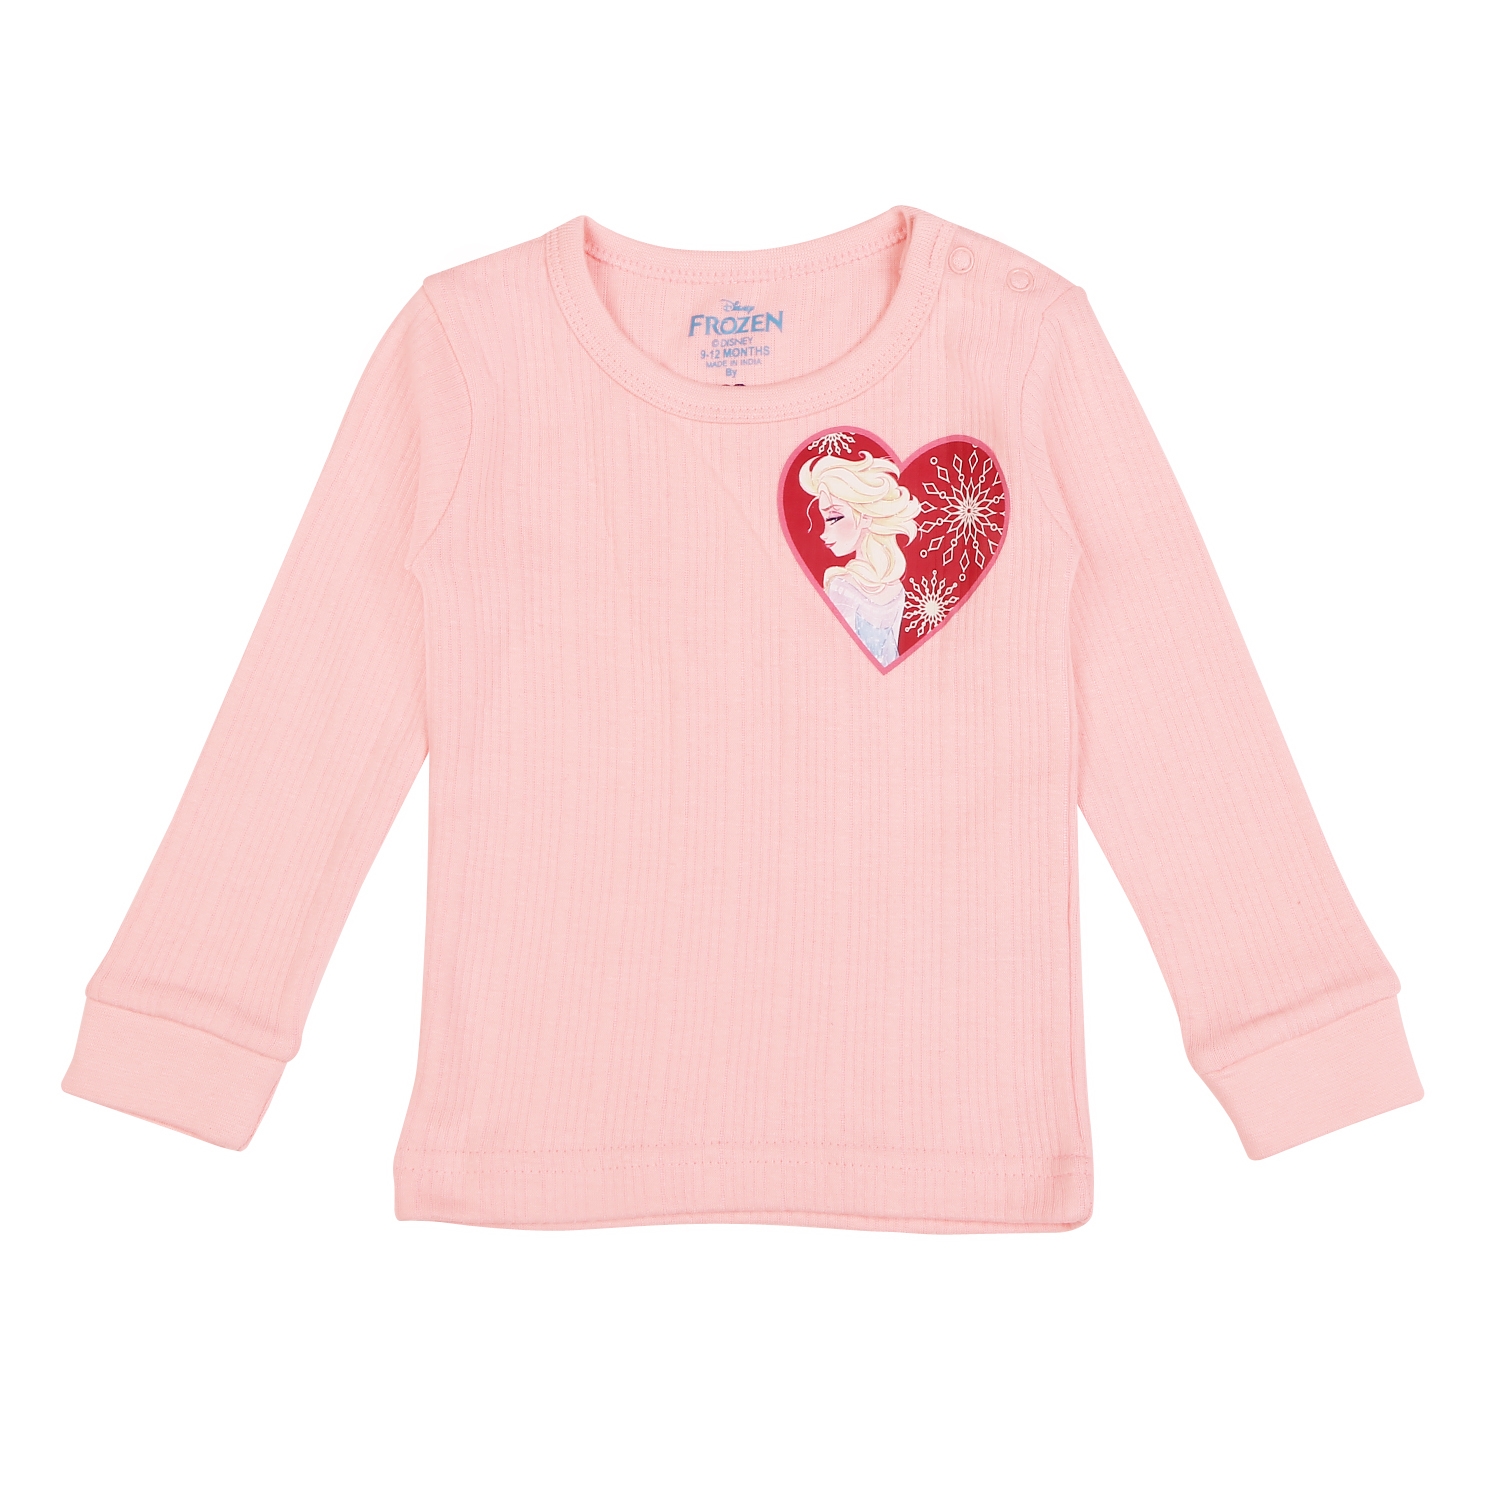 Mothercare | Girls Full Sleeves Frozen Thermal Vest-Pink 0